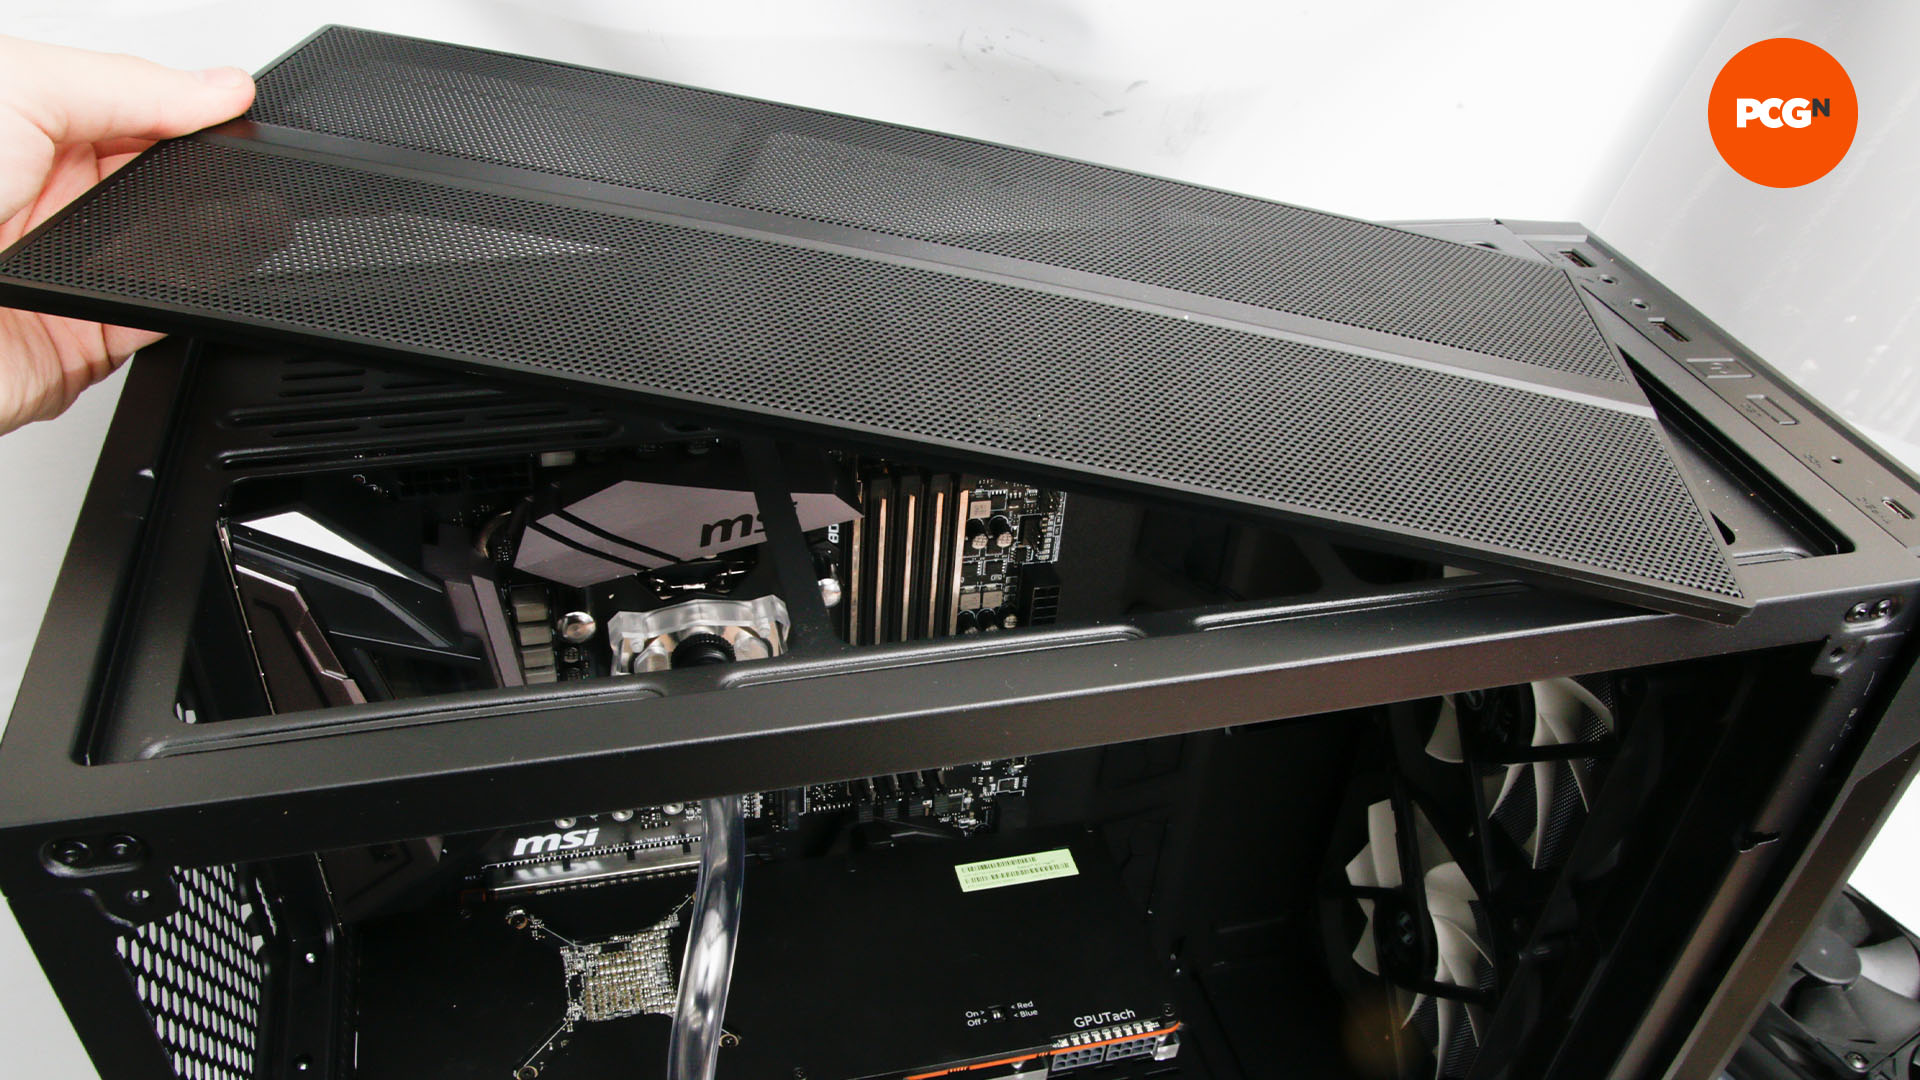 How to water cool your PC: Remove your PC case roof